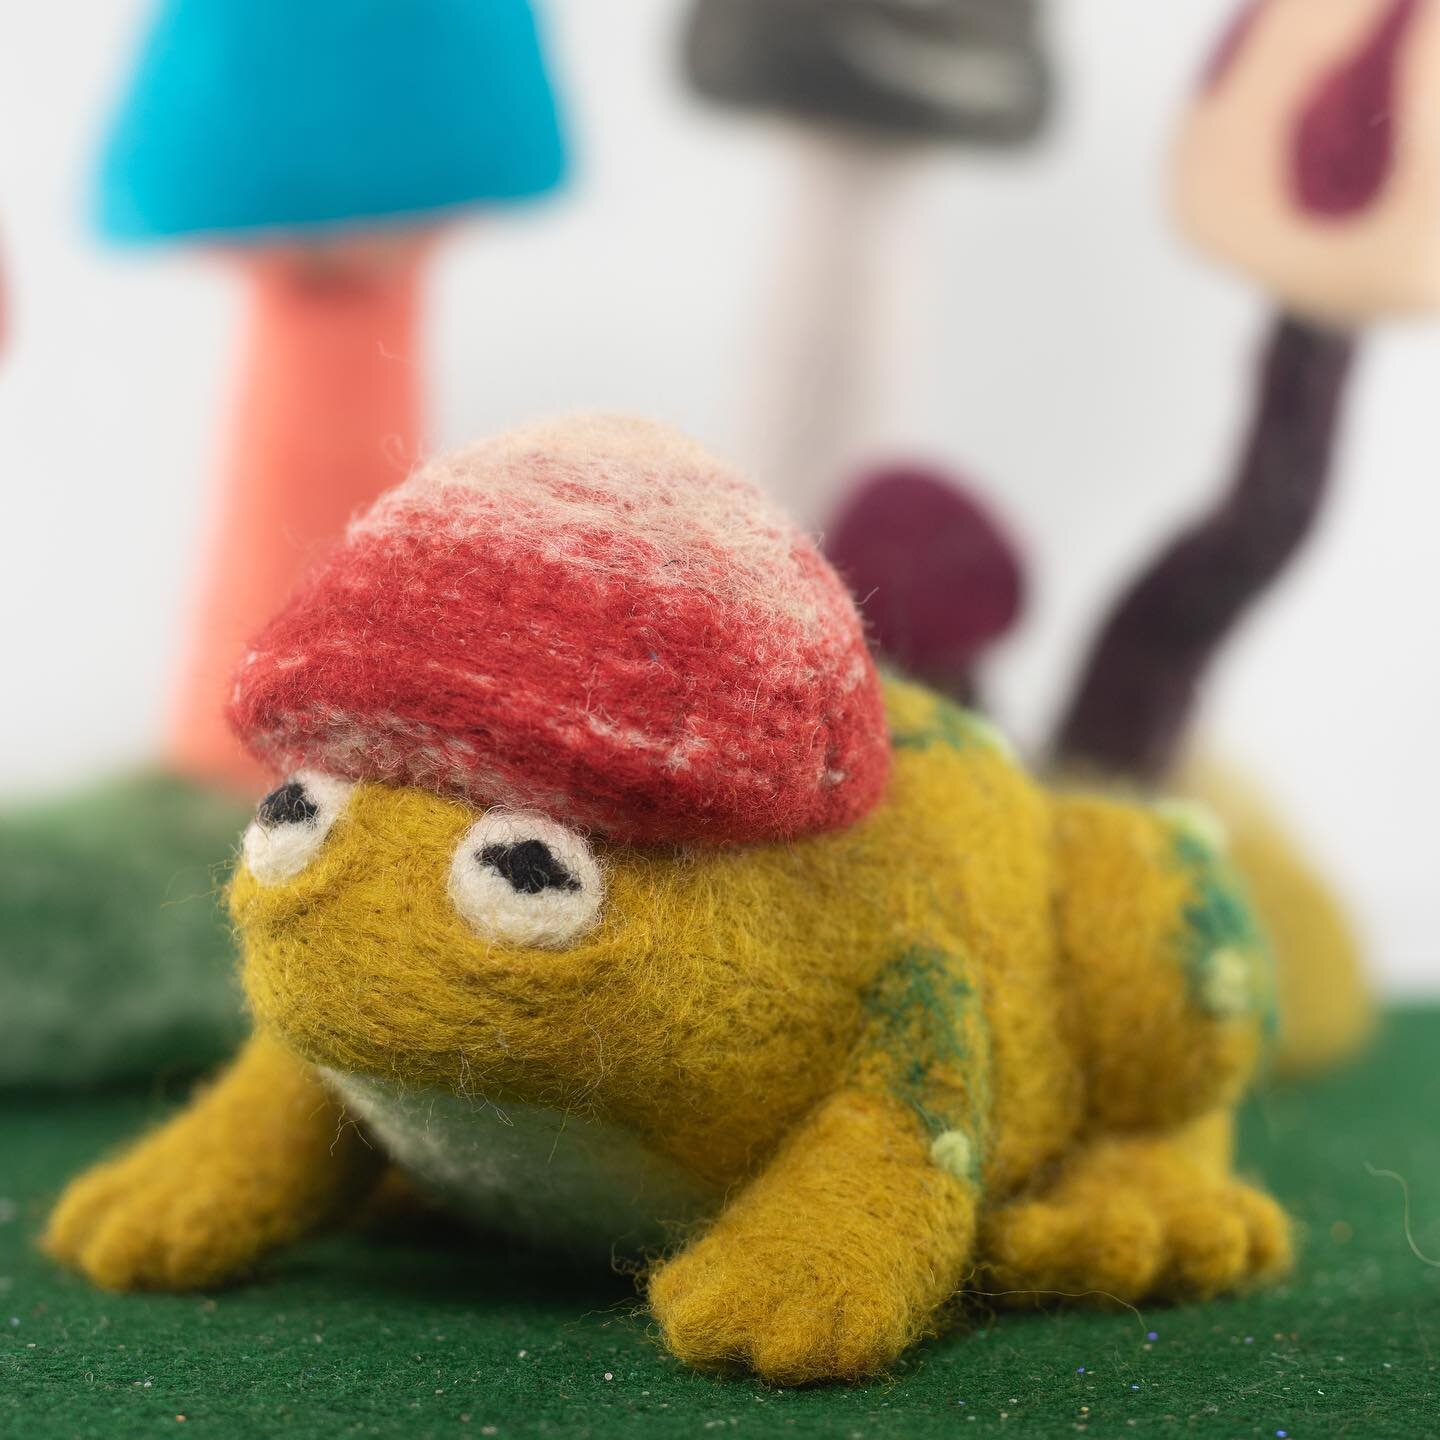 I made a friend for my friend for his friend! 
.
.
#felted #feltedwool #glamourshots #toad #fiberarts #mushrooms #mushroomart